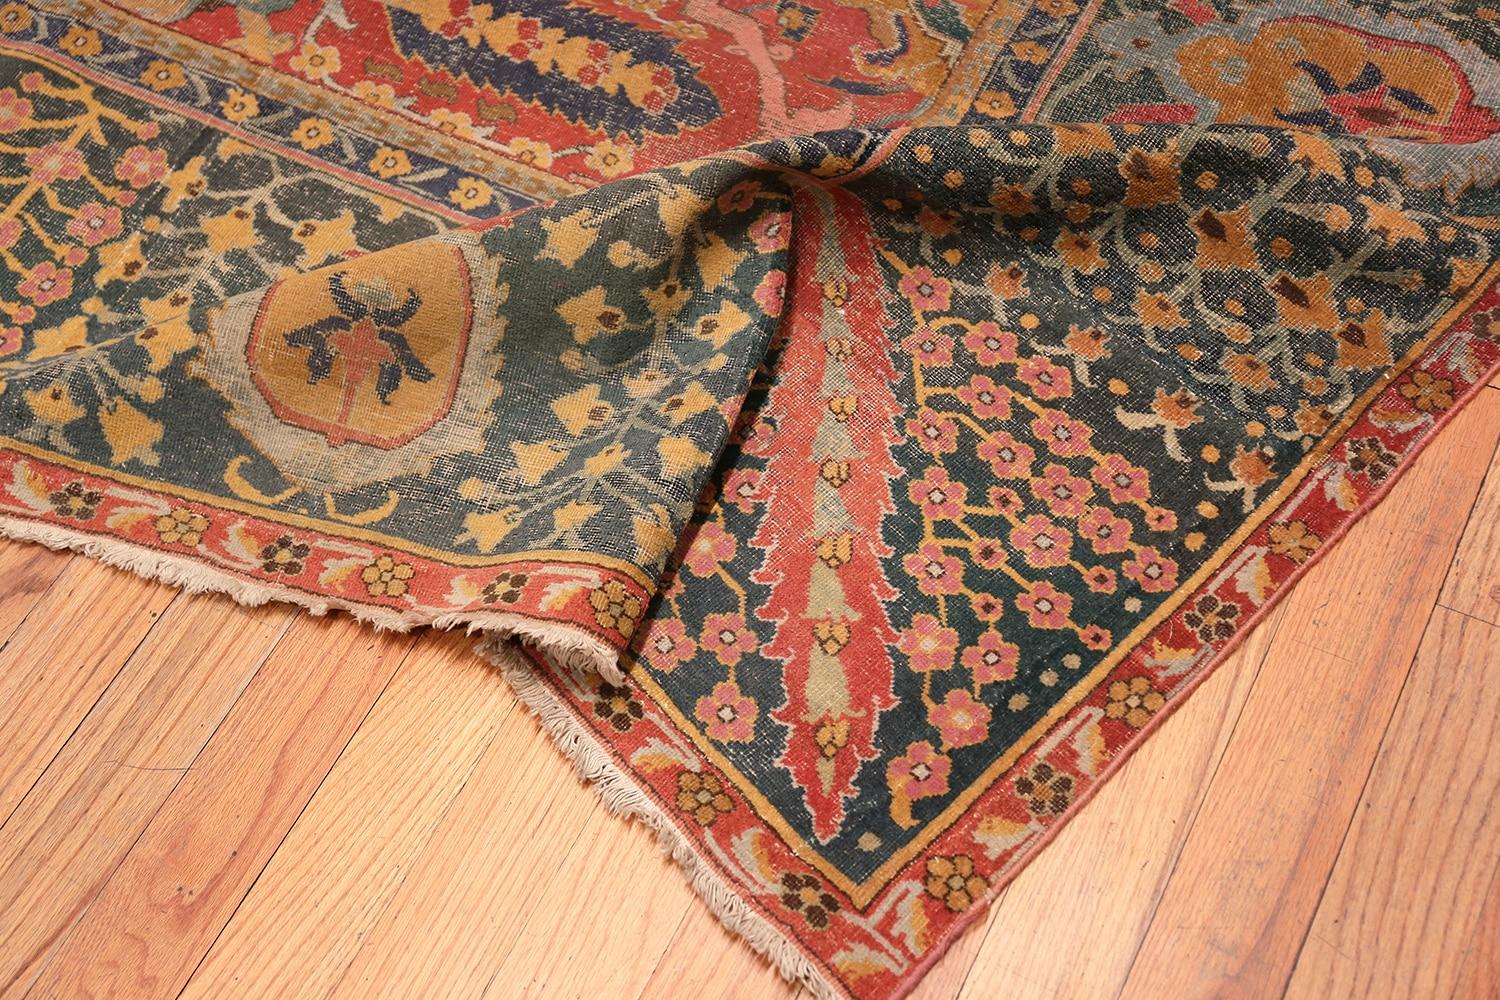 17th Century Antique Persian Isfahan Rug. Size: 11 ft 10 in x 18 ft 1 in 5